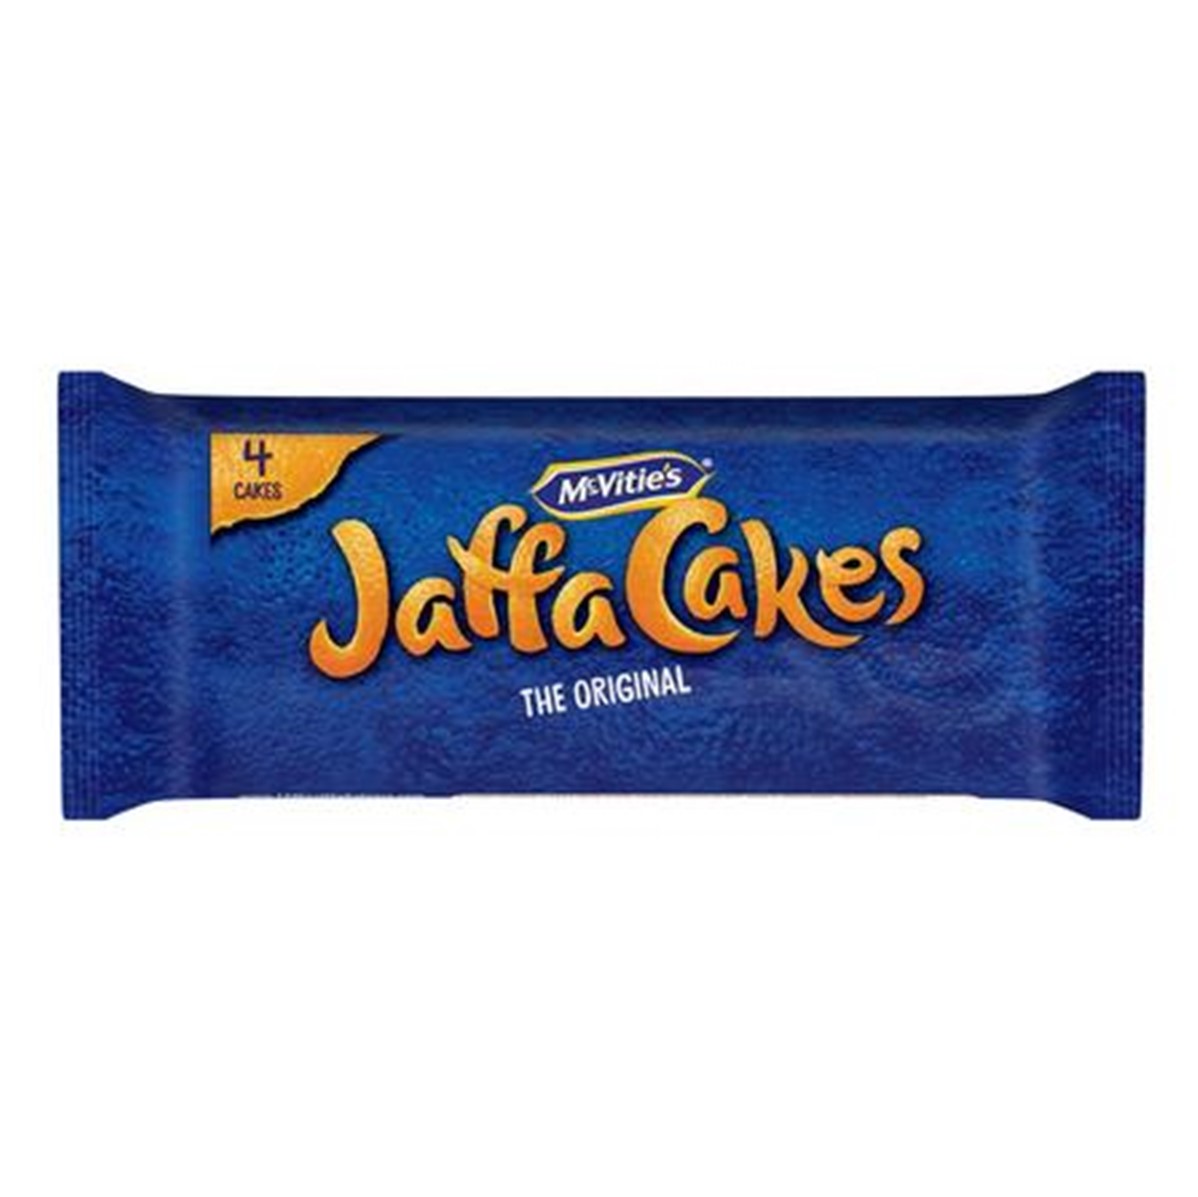 McVitie's Jaffa Cakes Snack Packs - 20x4 biscuits